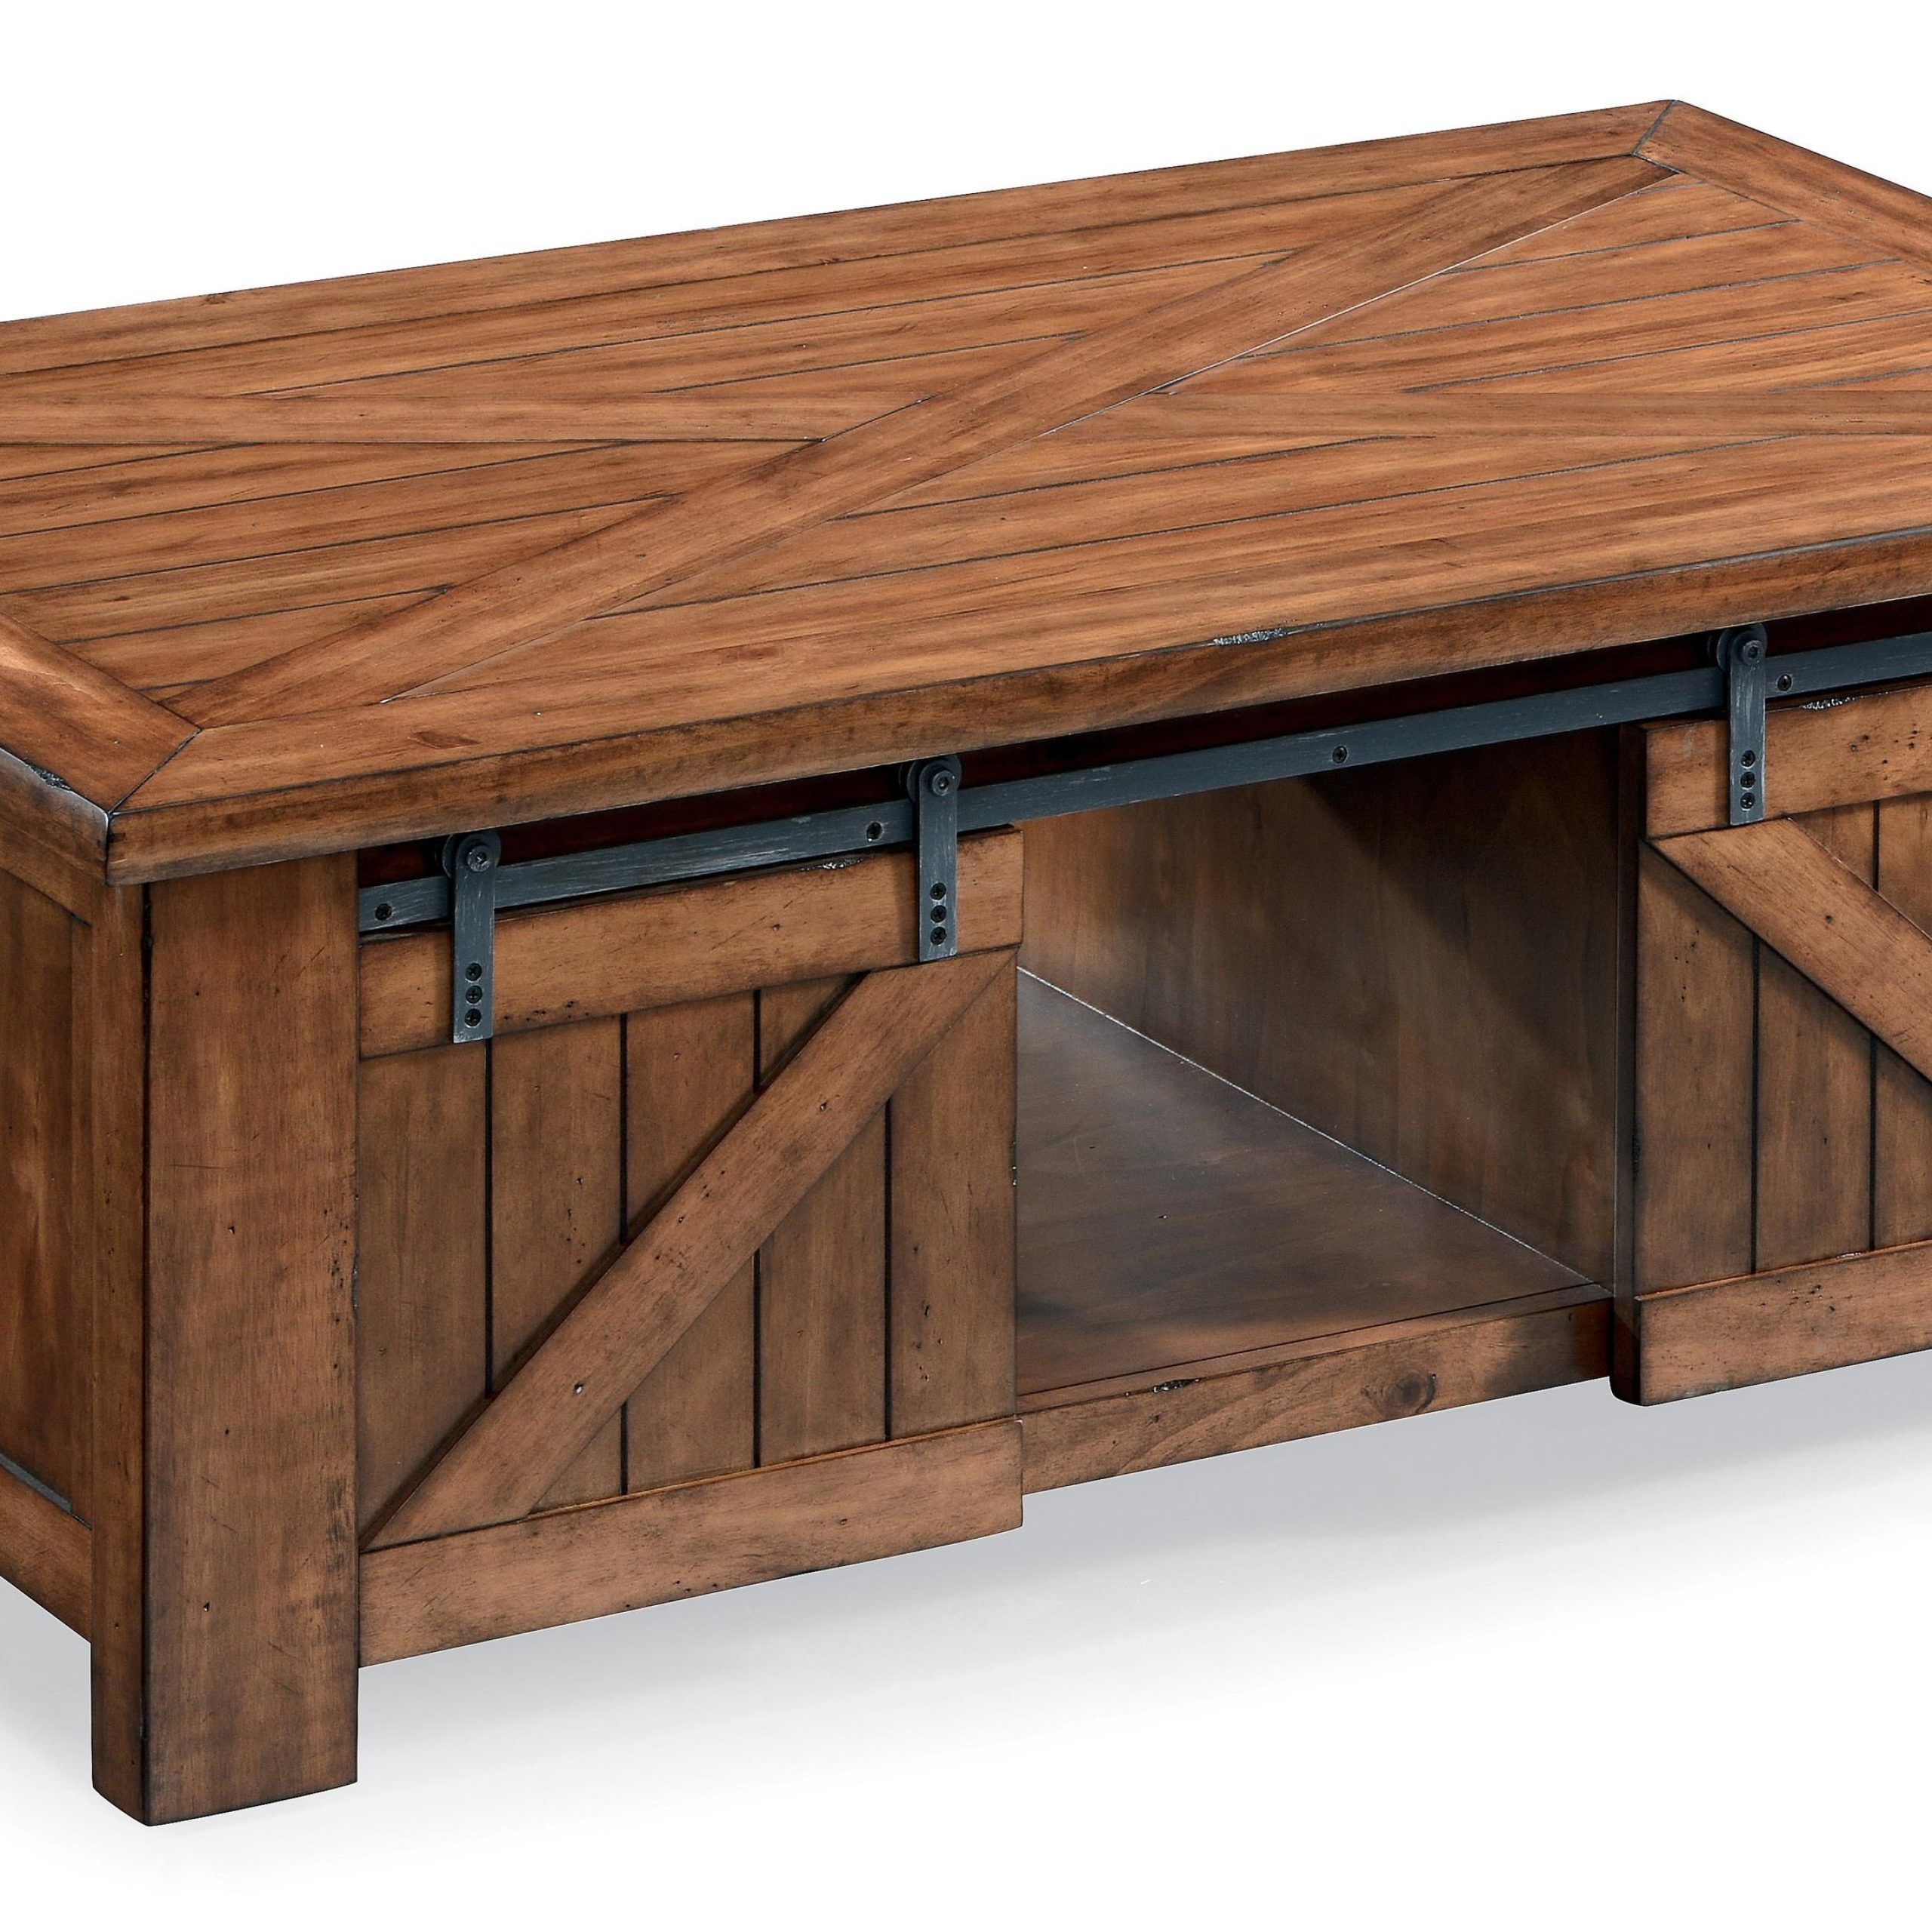 Harper Farm Country Industrial Rectangular Lift Top Cocktail Table With Inside Coffee Tables With Storage And Barn Doors (Gallery 4 of 20)